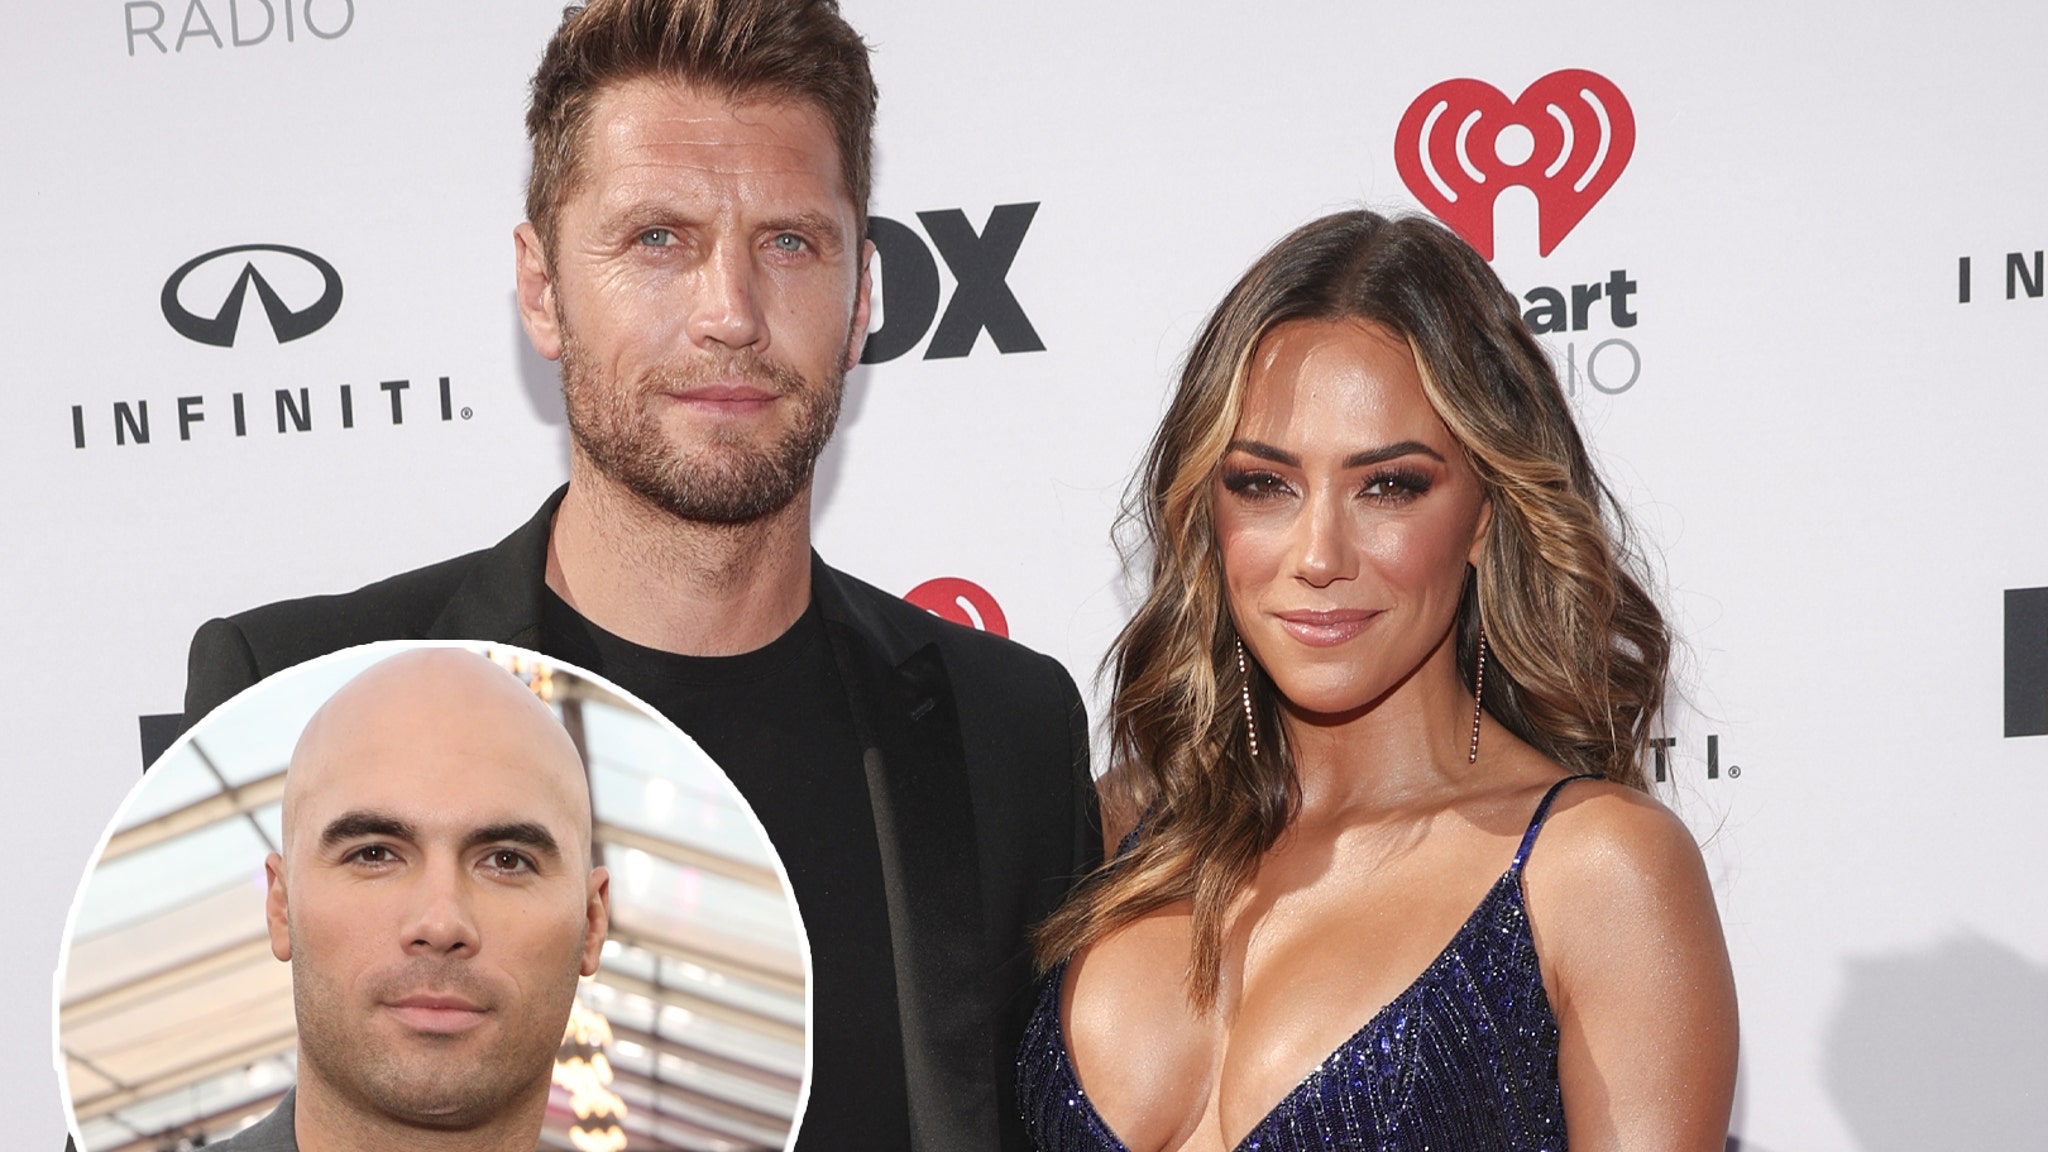 Jana Kramer Defends Engagement to Allan Russell After Just Six Months of Dating, Shows Off Ring